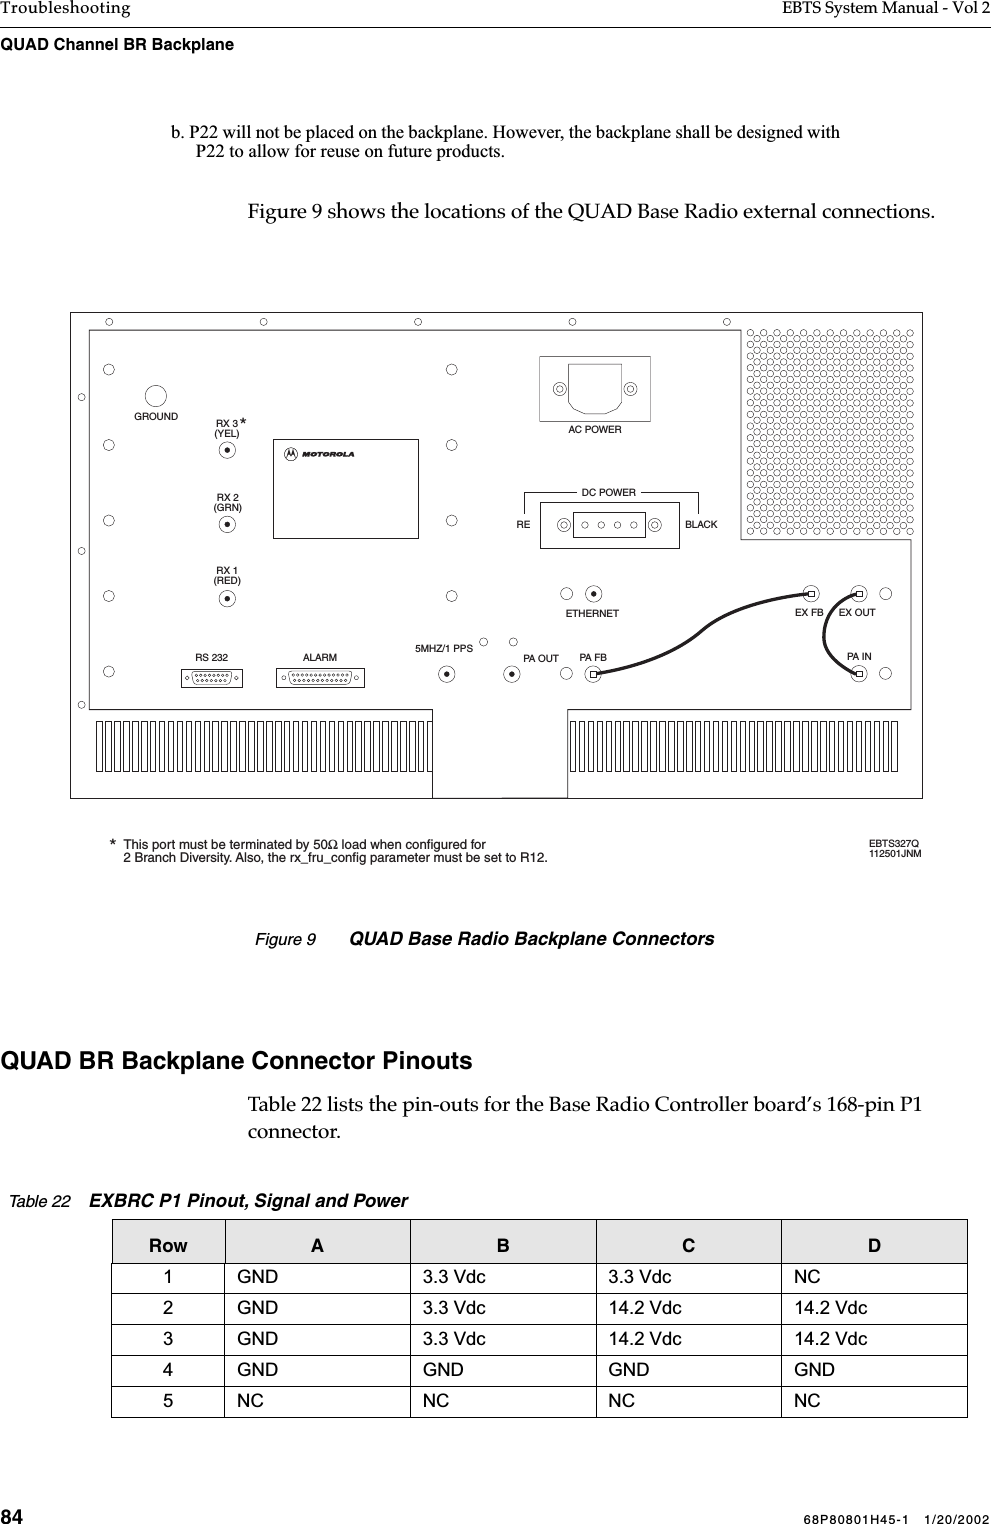 84 68P80801H45-1   1/20/2002Troubleshooting EBTS System Manual - Vol 2QUAD Channel BR Backplane Figure 9 shows the locations of the QUAD Base Radio external connections.QUAD BR Backplane Connector PinoutsTable 22 lists the pin-outs for the Base Radio Controller board’s 168-pin P1 connector. b. P22 will not be placed on the backplane. However, the backplane shall be designed with P22 to allow for reuse on future products.Table 22    EXBRC P1 Pinout, Signal and PowerRow A B C D1 GND 3.3 Vdc 3.3 Vdc NC2 GND 3.3 Vdc 14.2 Vdc 14.2 Vdc3 GND 3.3 Vdc 14.2 Vdc 14.2 Vdc4 GND GND GND GND5NCNCNCNCEX OUTPA INETHERNETPA FBDC POWERAC POWERRS 232 ALARMRX 1(RED)RX 2(GRN)RX 3(YEL)5MHZ/1 PPSPA OUTGROUNDEBTS327Q112501JNMRE BLACKThis port must be terminated by 50Ω load when configured for2 Branch Diversity. Also, the rx_fru_config parameter must be set to R12.**EX FBFigure 9 QUAD Base Radio Backplane Connectors